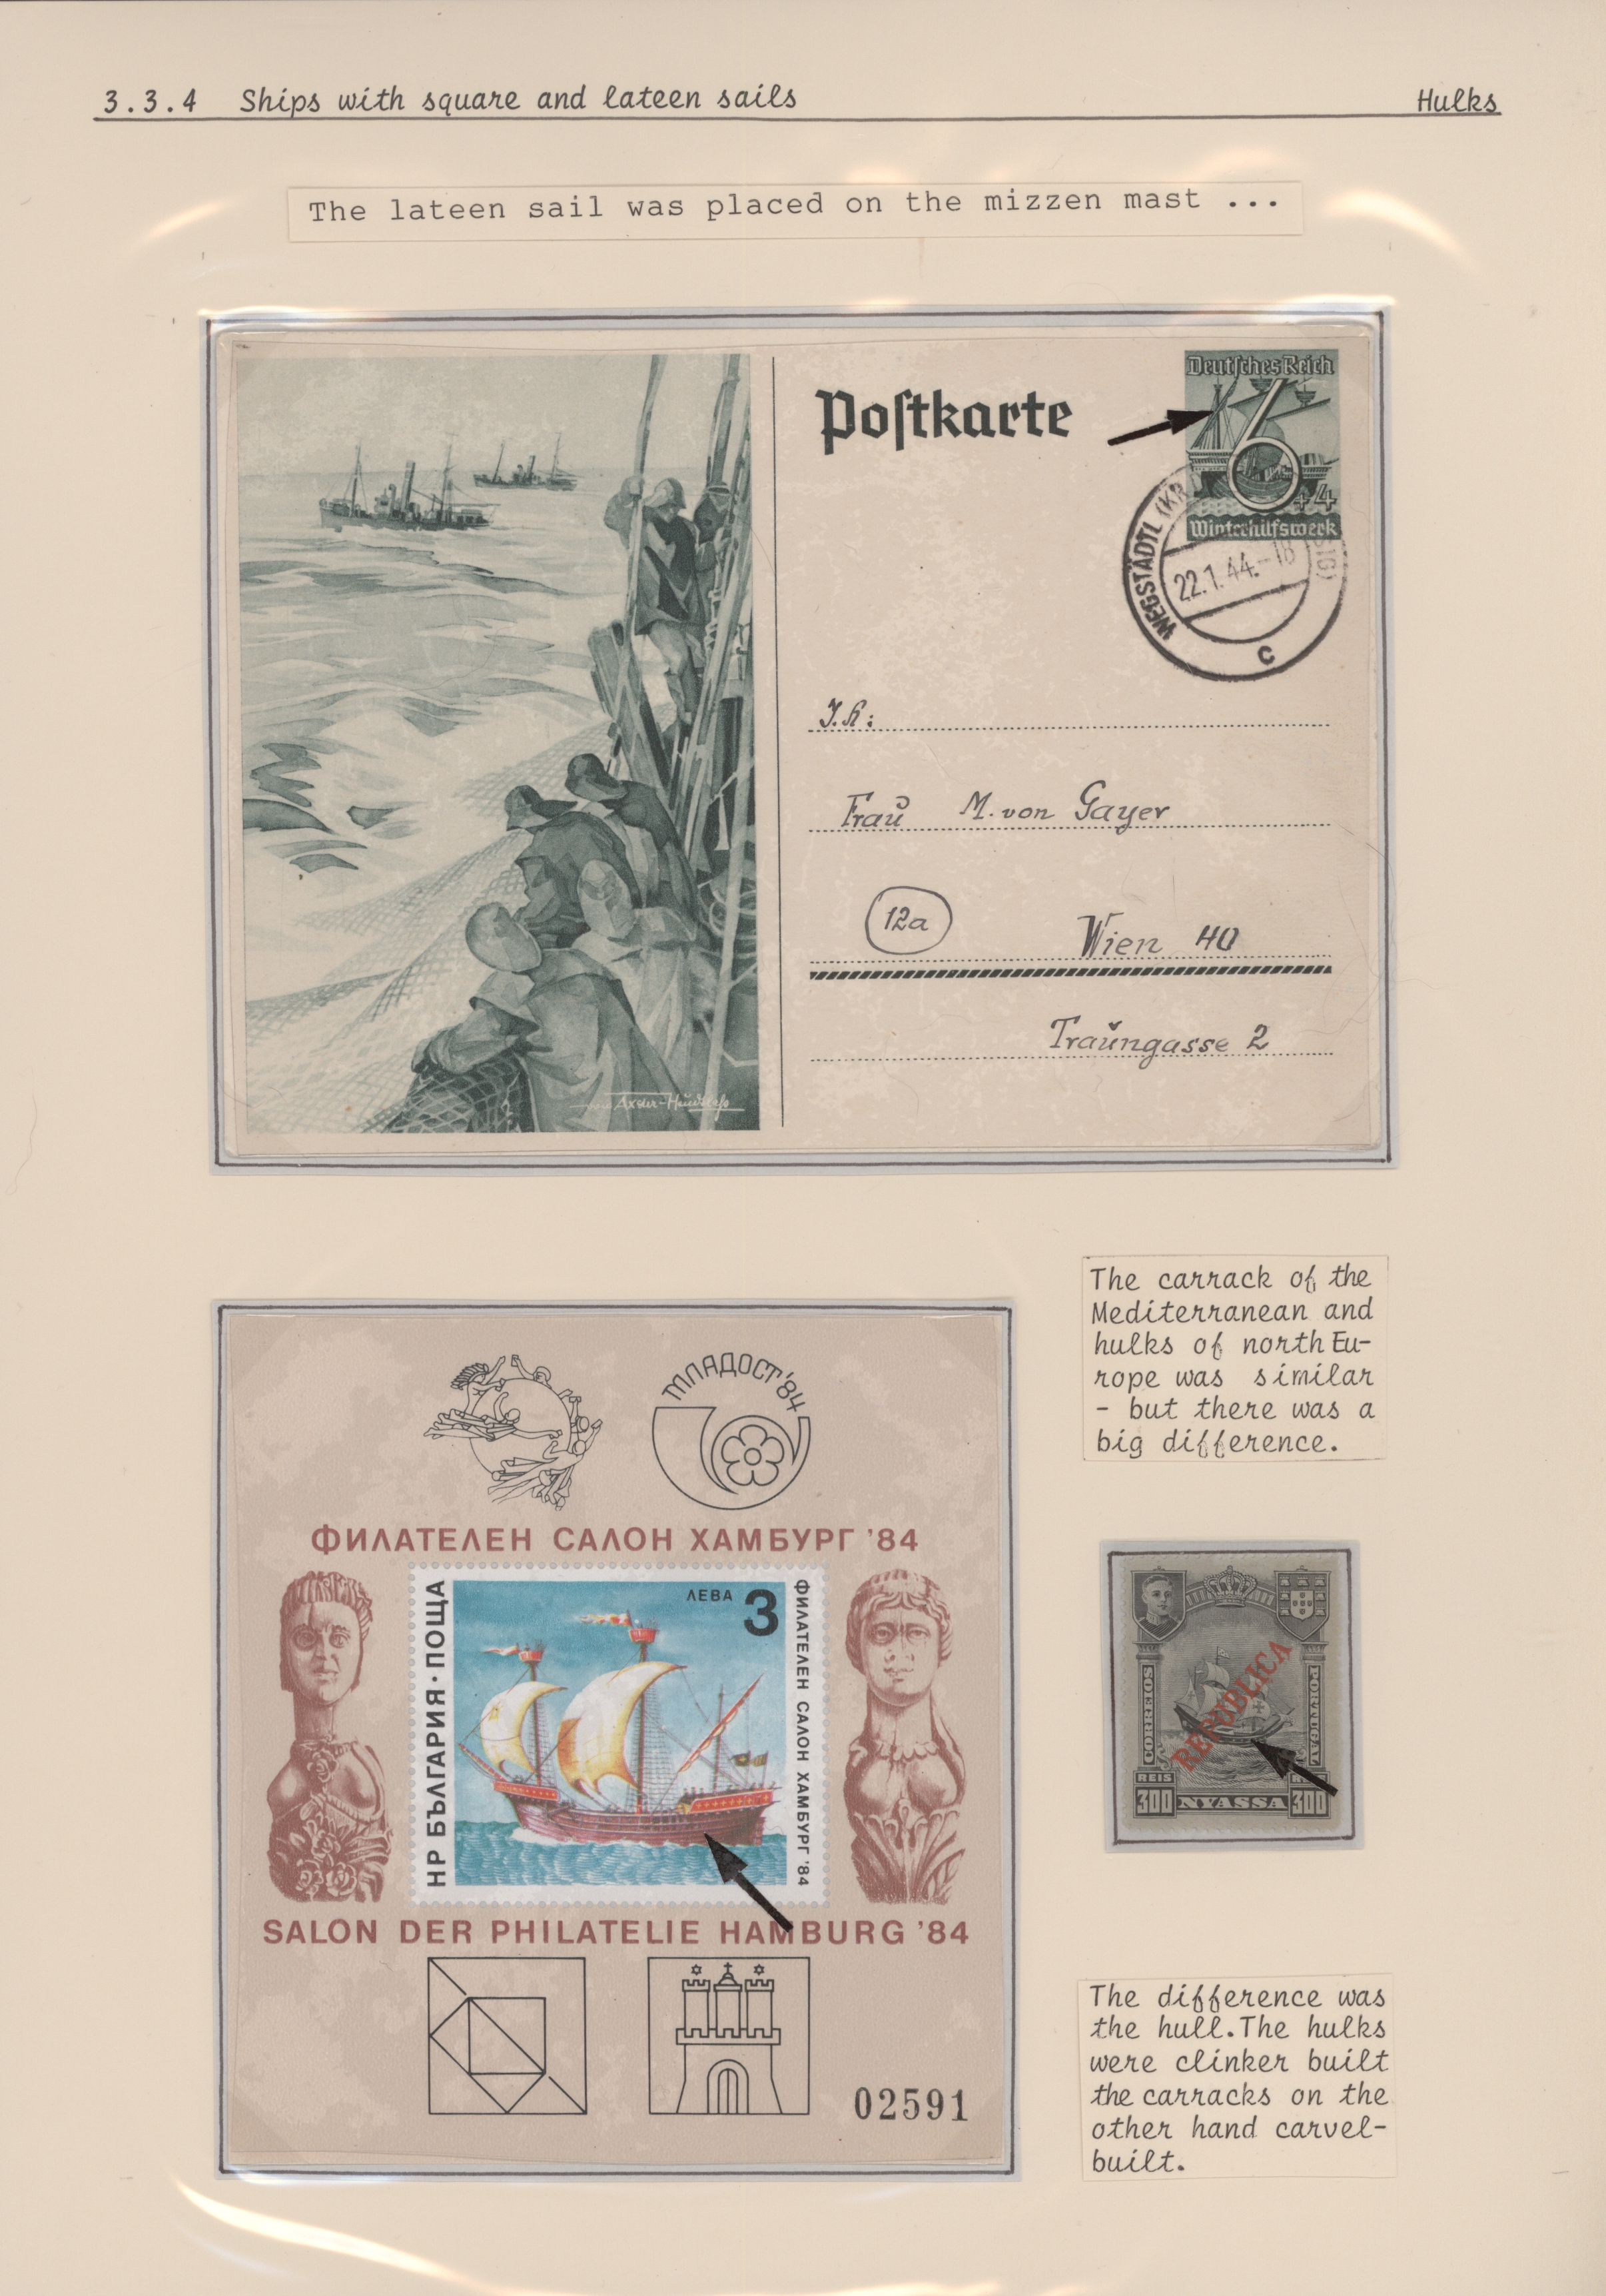 Lot 07522 - nachlässe  -  Auktionshaus Christoph Gärtner GmbH & Co. KG 53rd AUCTION - Day 5, Collections Estates, Germany, Picture Postcards